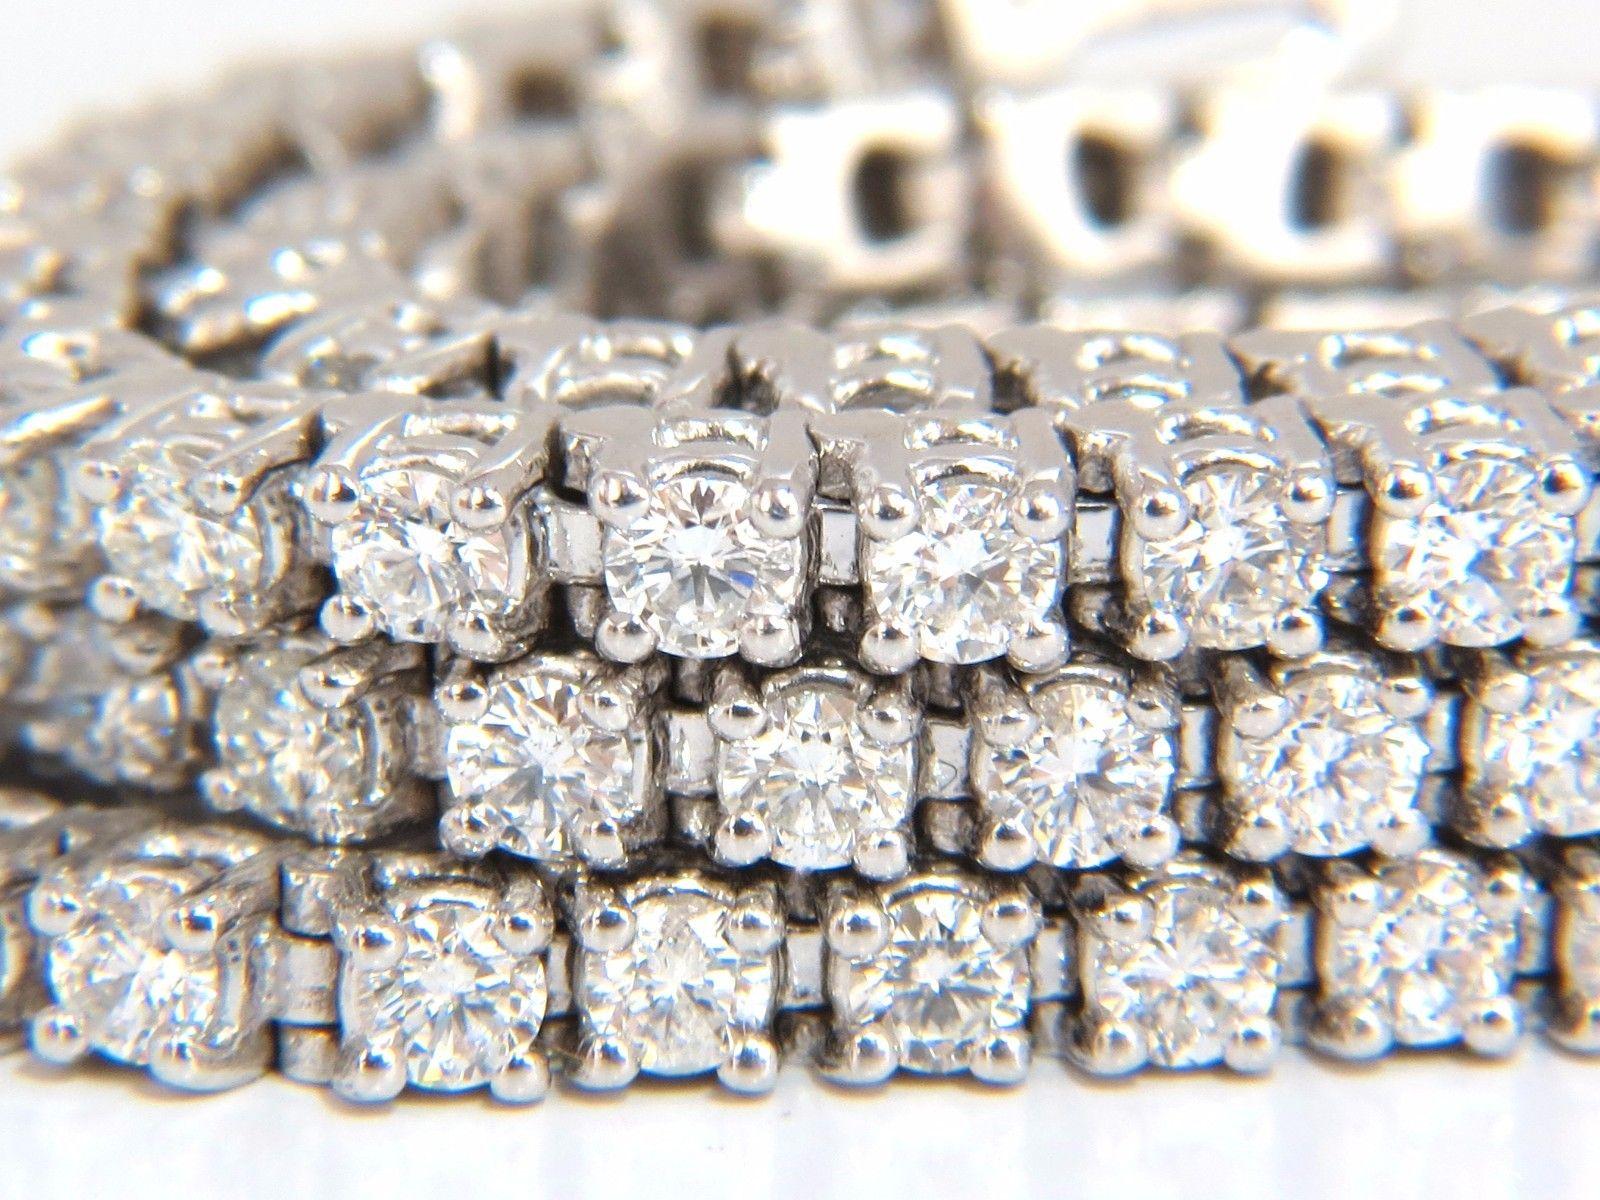 Classic Three Row.

12.32ct. natural diamonds Tennis Bracelet.

Rounds, Full cut brilliants

147 Diamonds

G colors Vs-2 clarity

14kt. white gold

38.7 Grams.

7 Inches long (wearable length)

10mm wide

pressure clasp and safety catch 

Appraisal